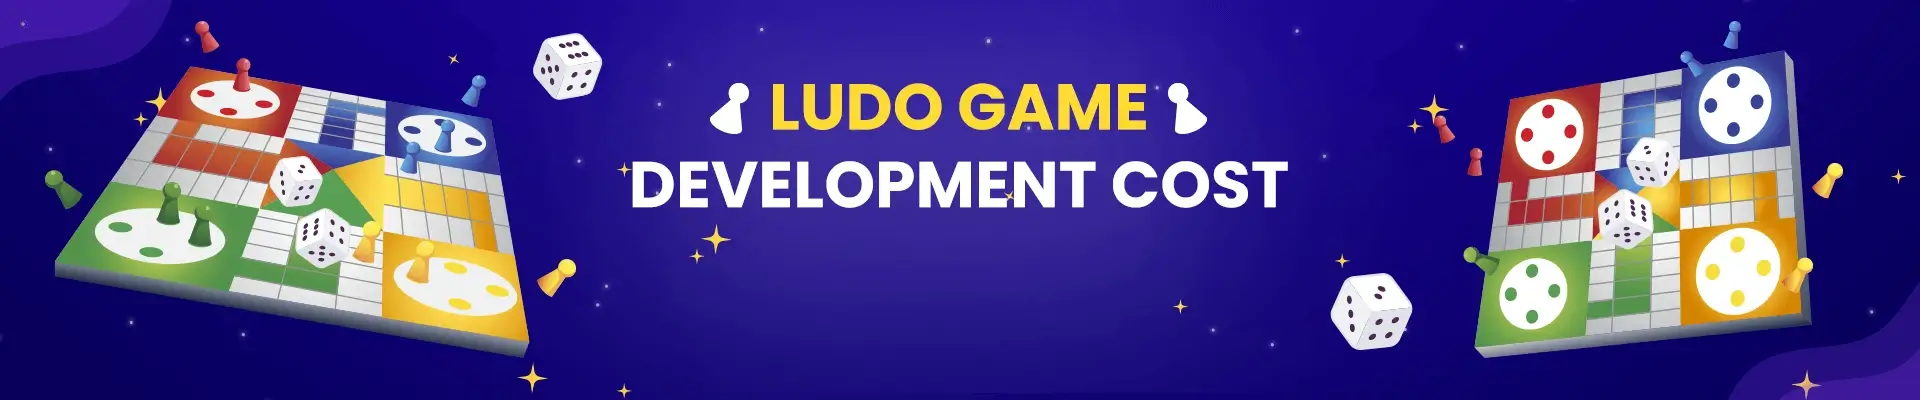 Cost to Develop Ludo Game